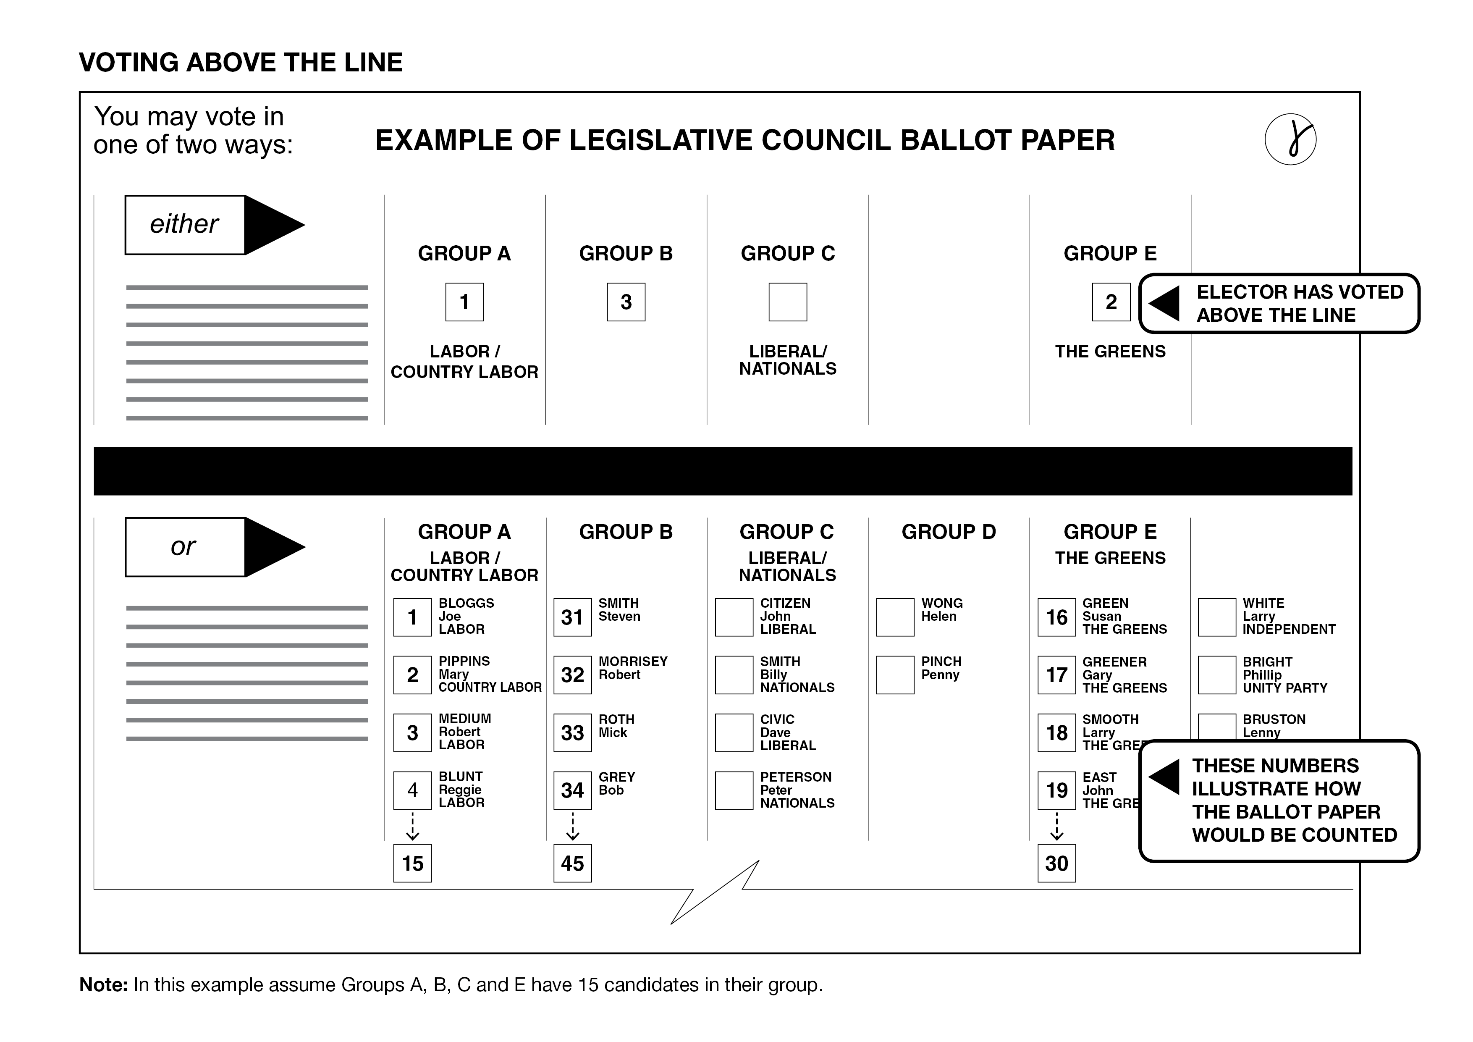 ballot paper with above the line voting